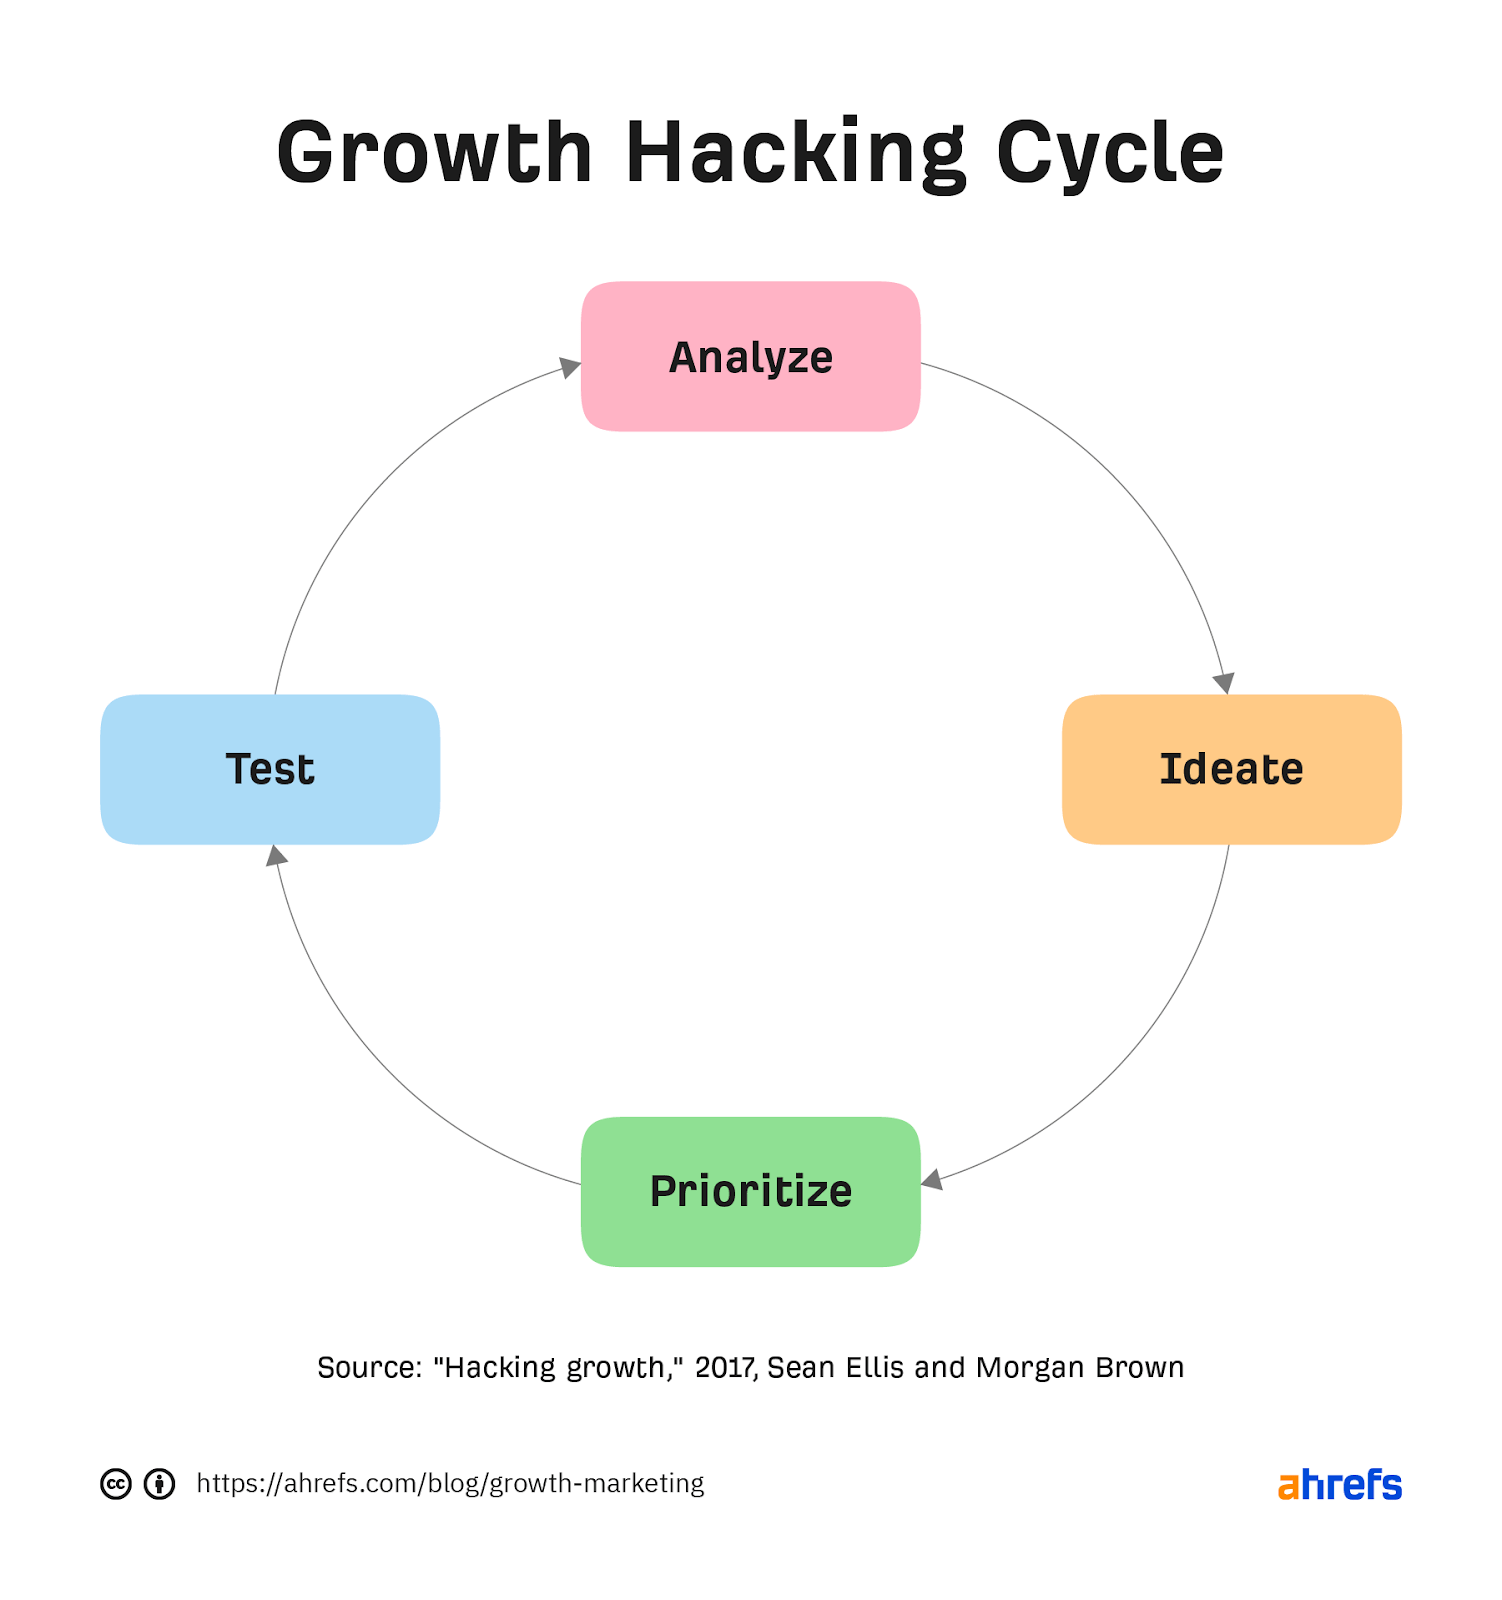 Growth hacking cycle